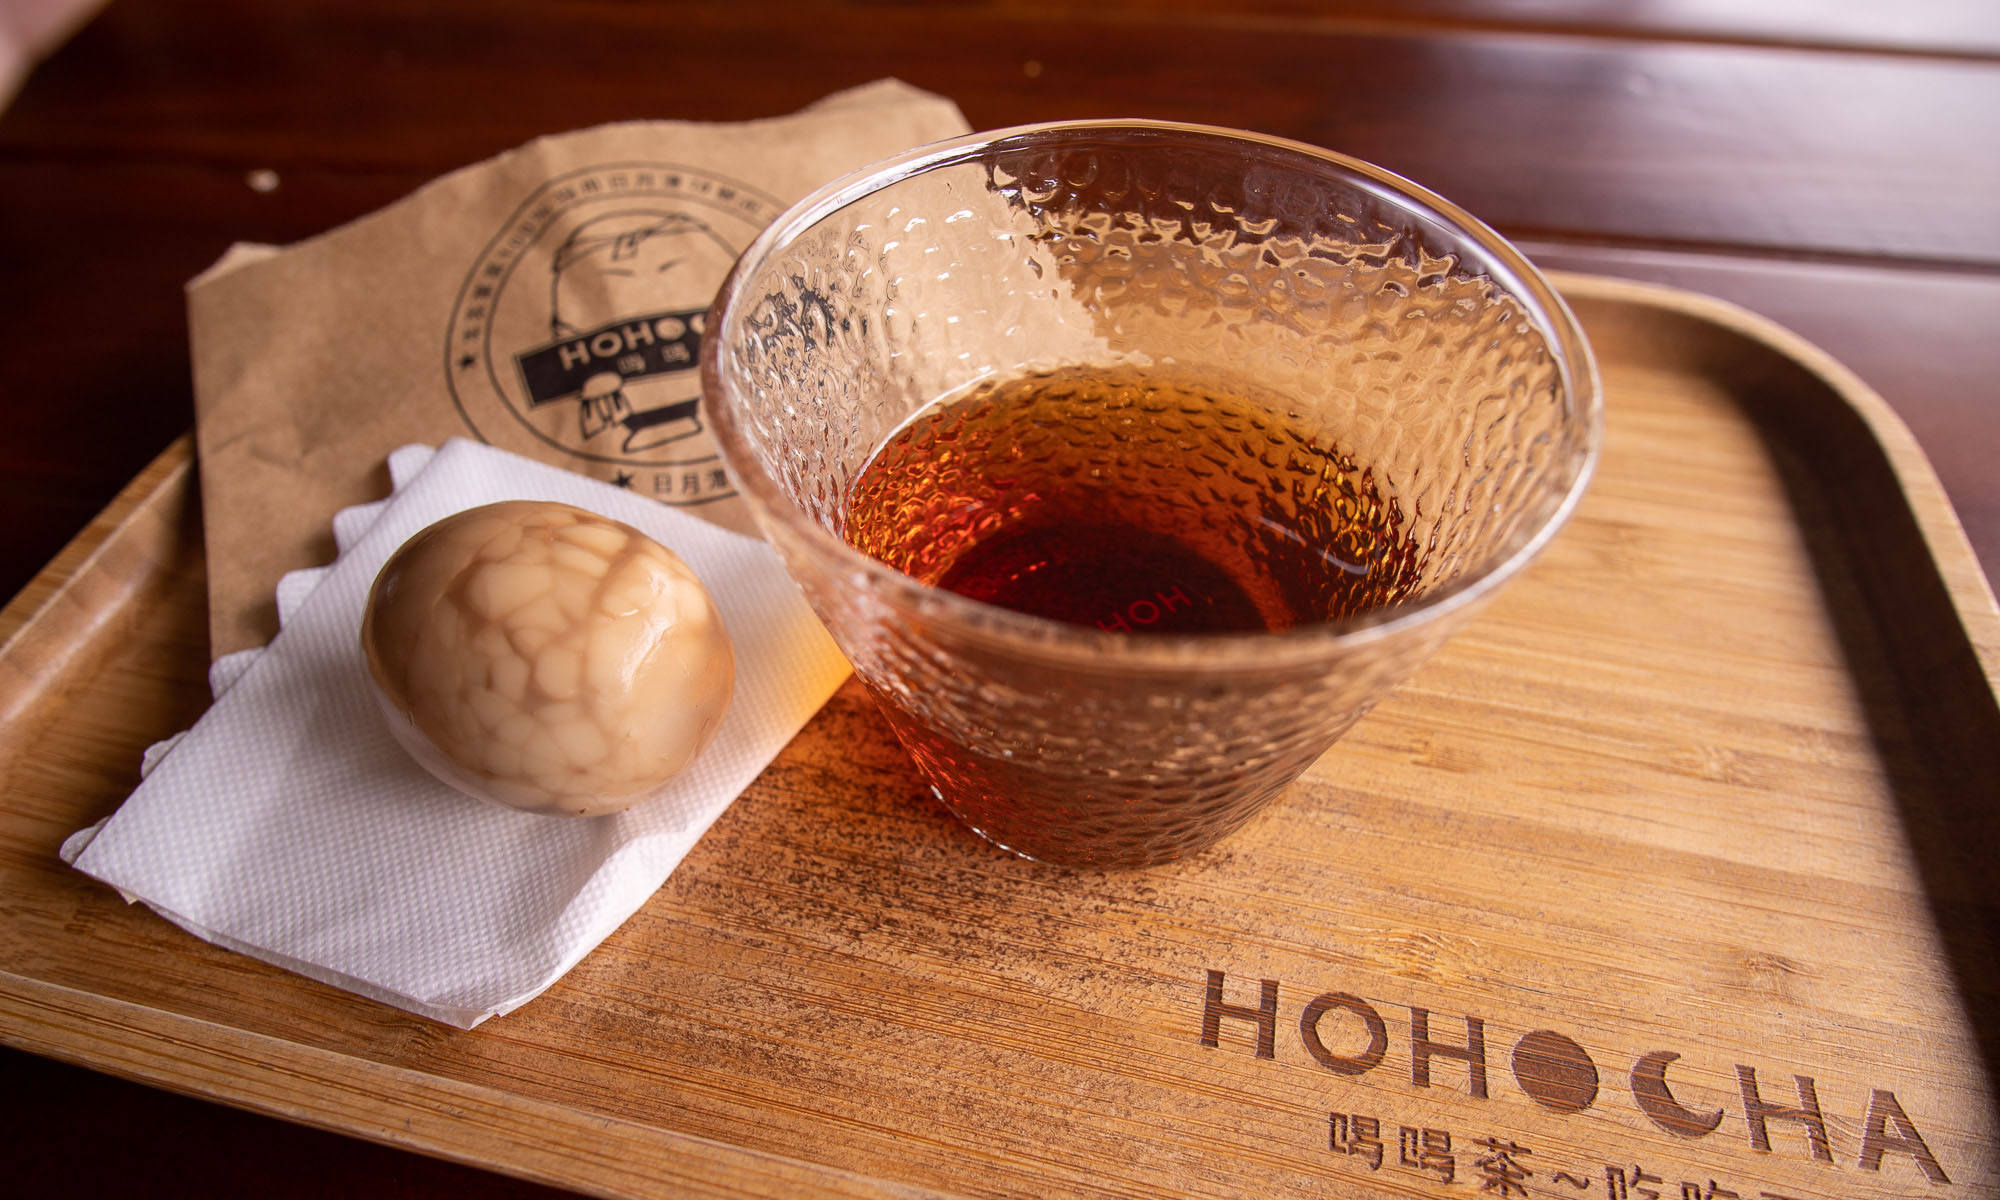 HoHoCha welcomes all visitors with a cup of local black tea and specially made tea egg.